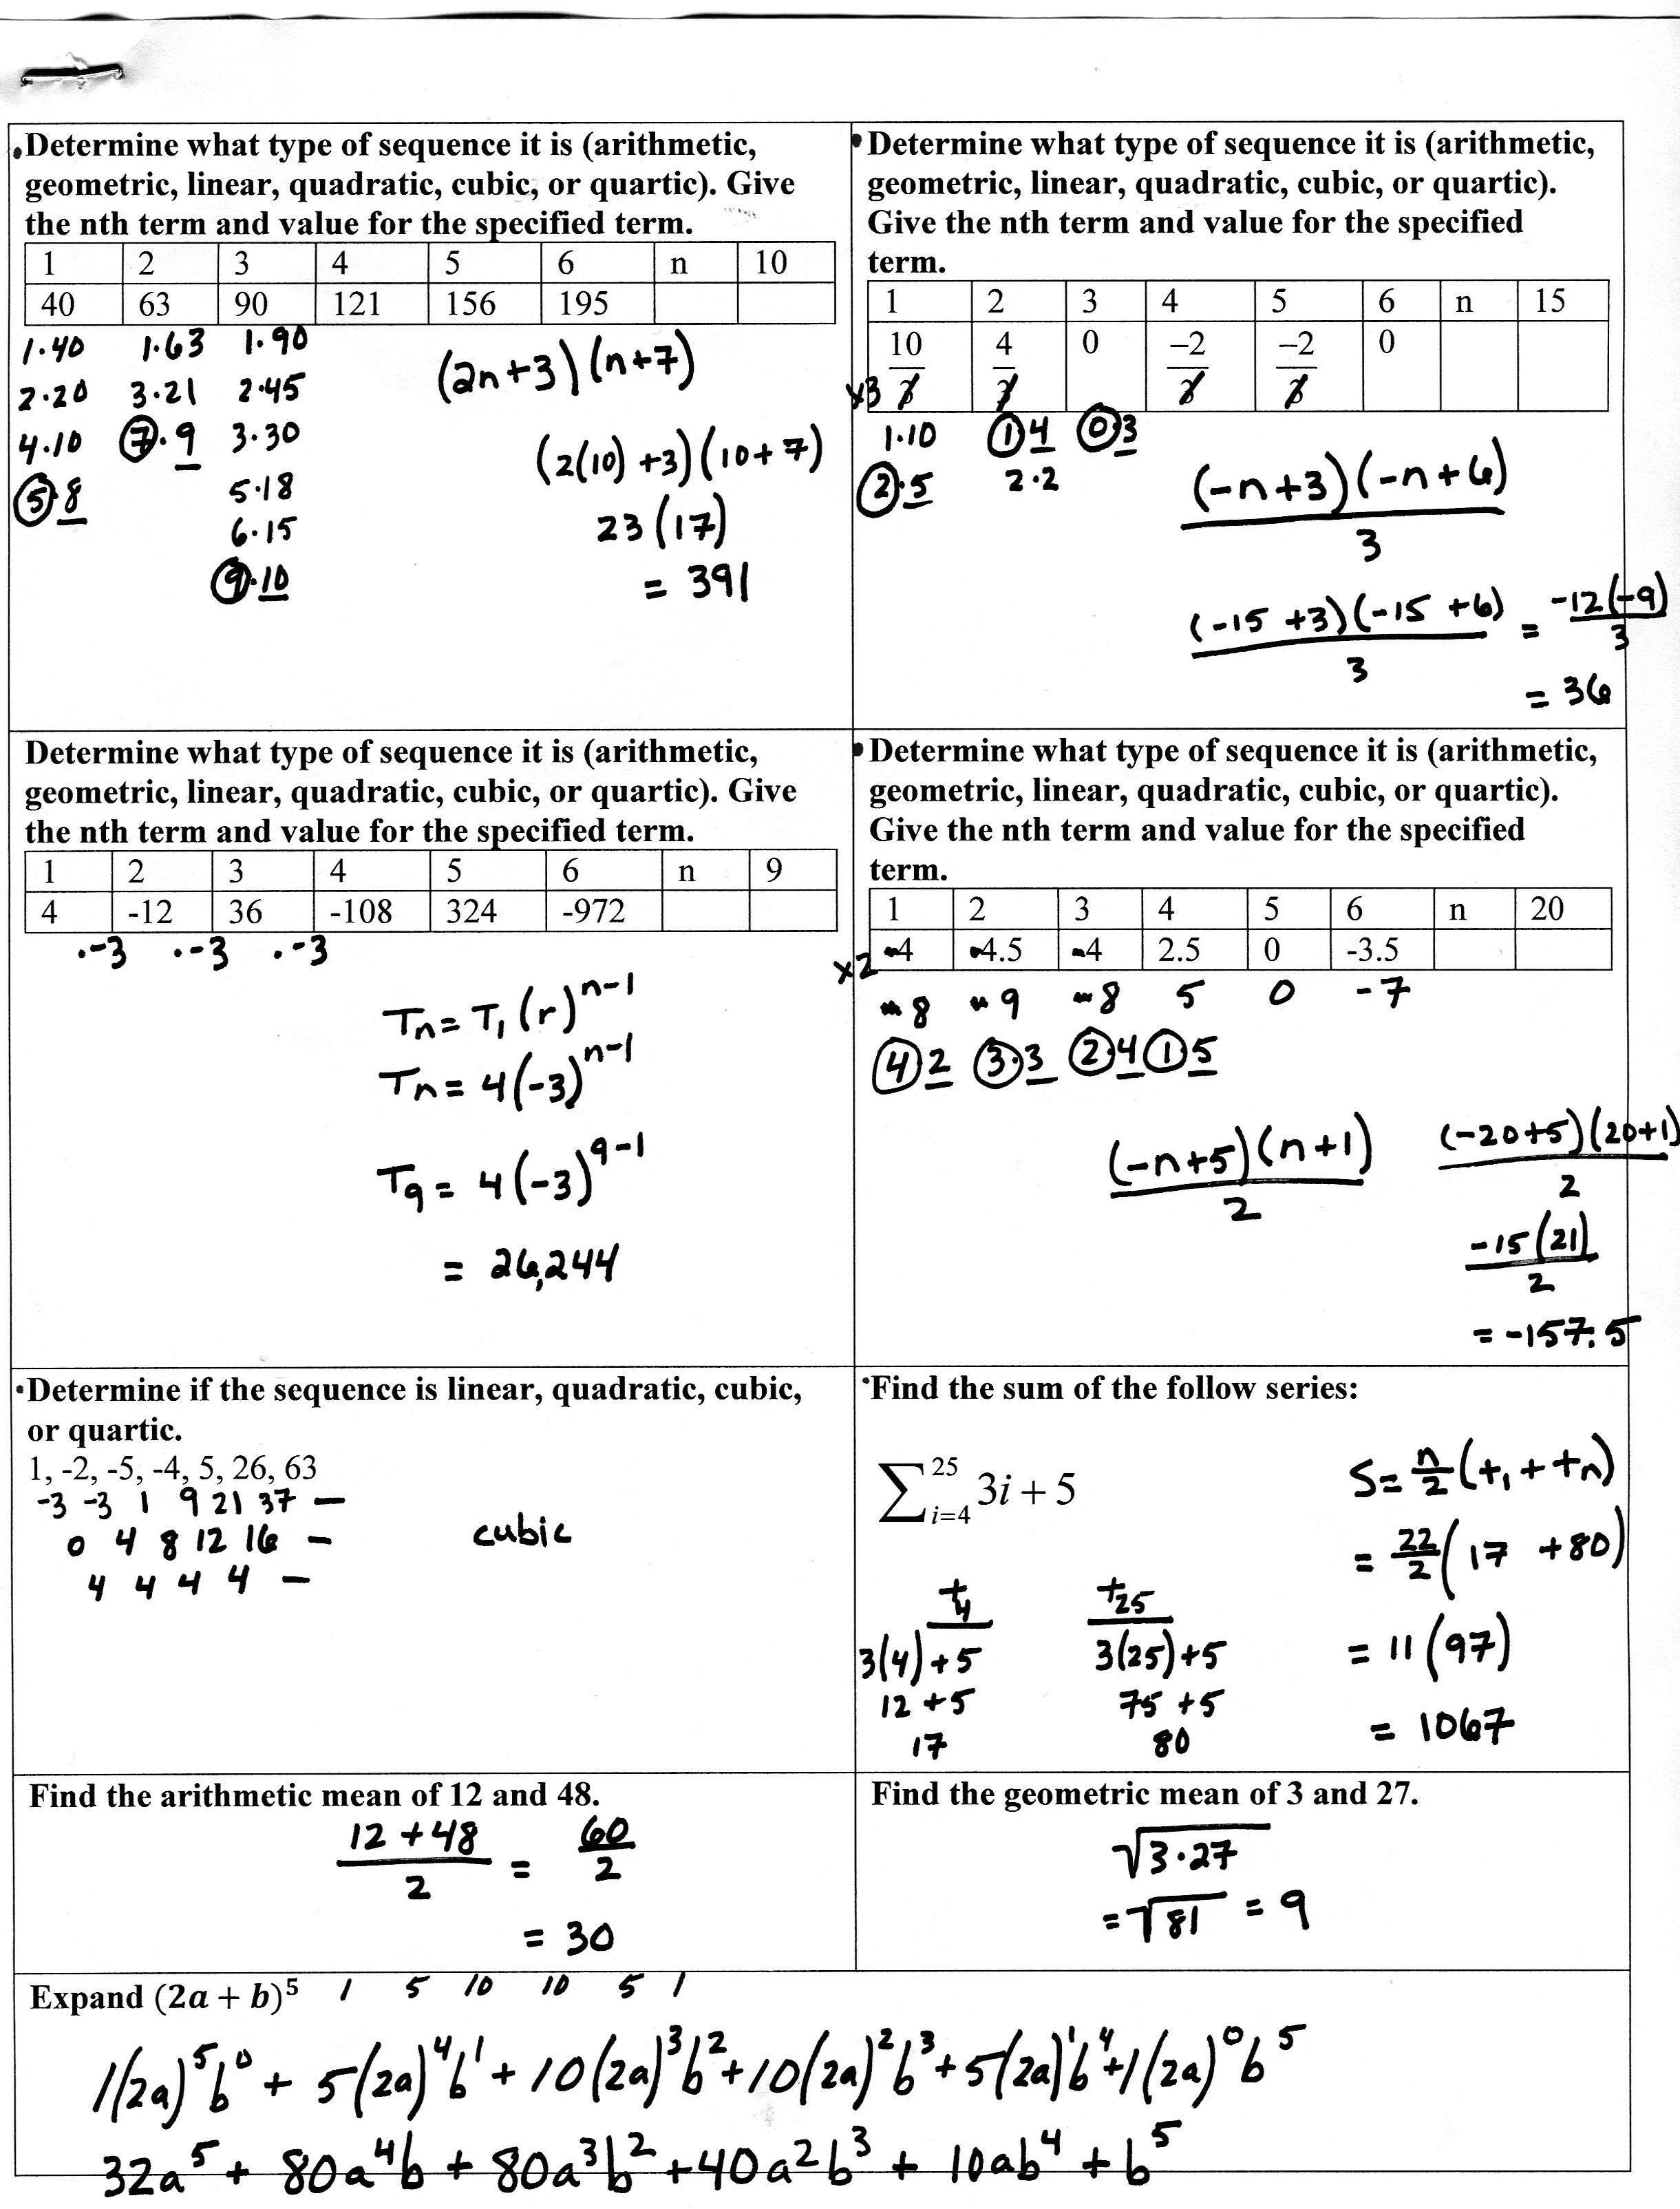 geometric sequence worksheet answers